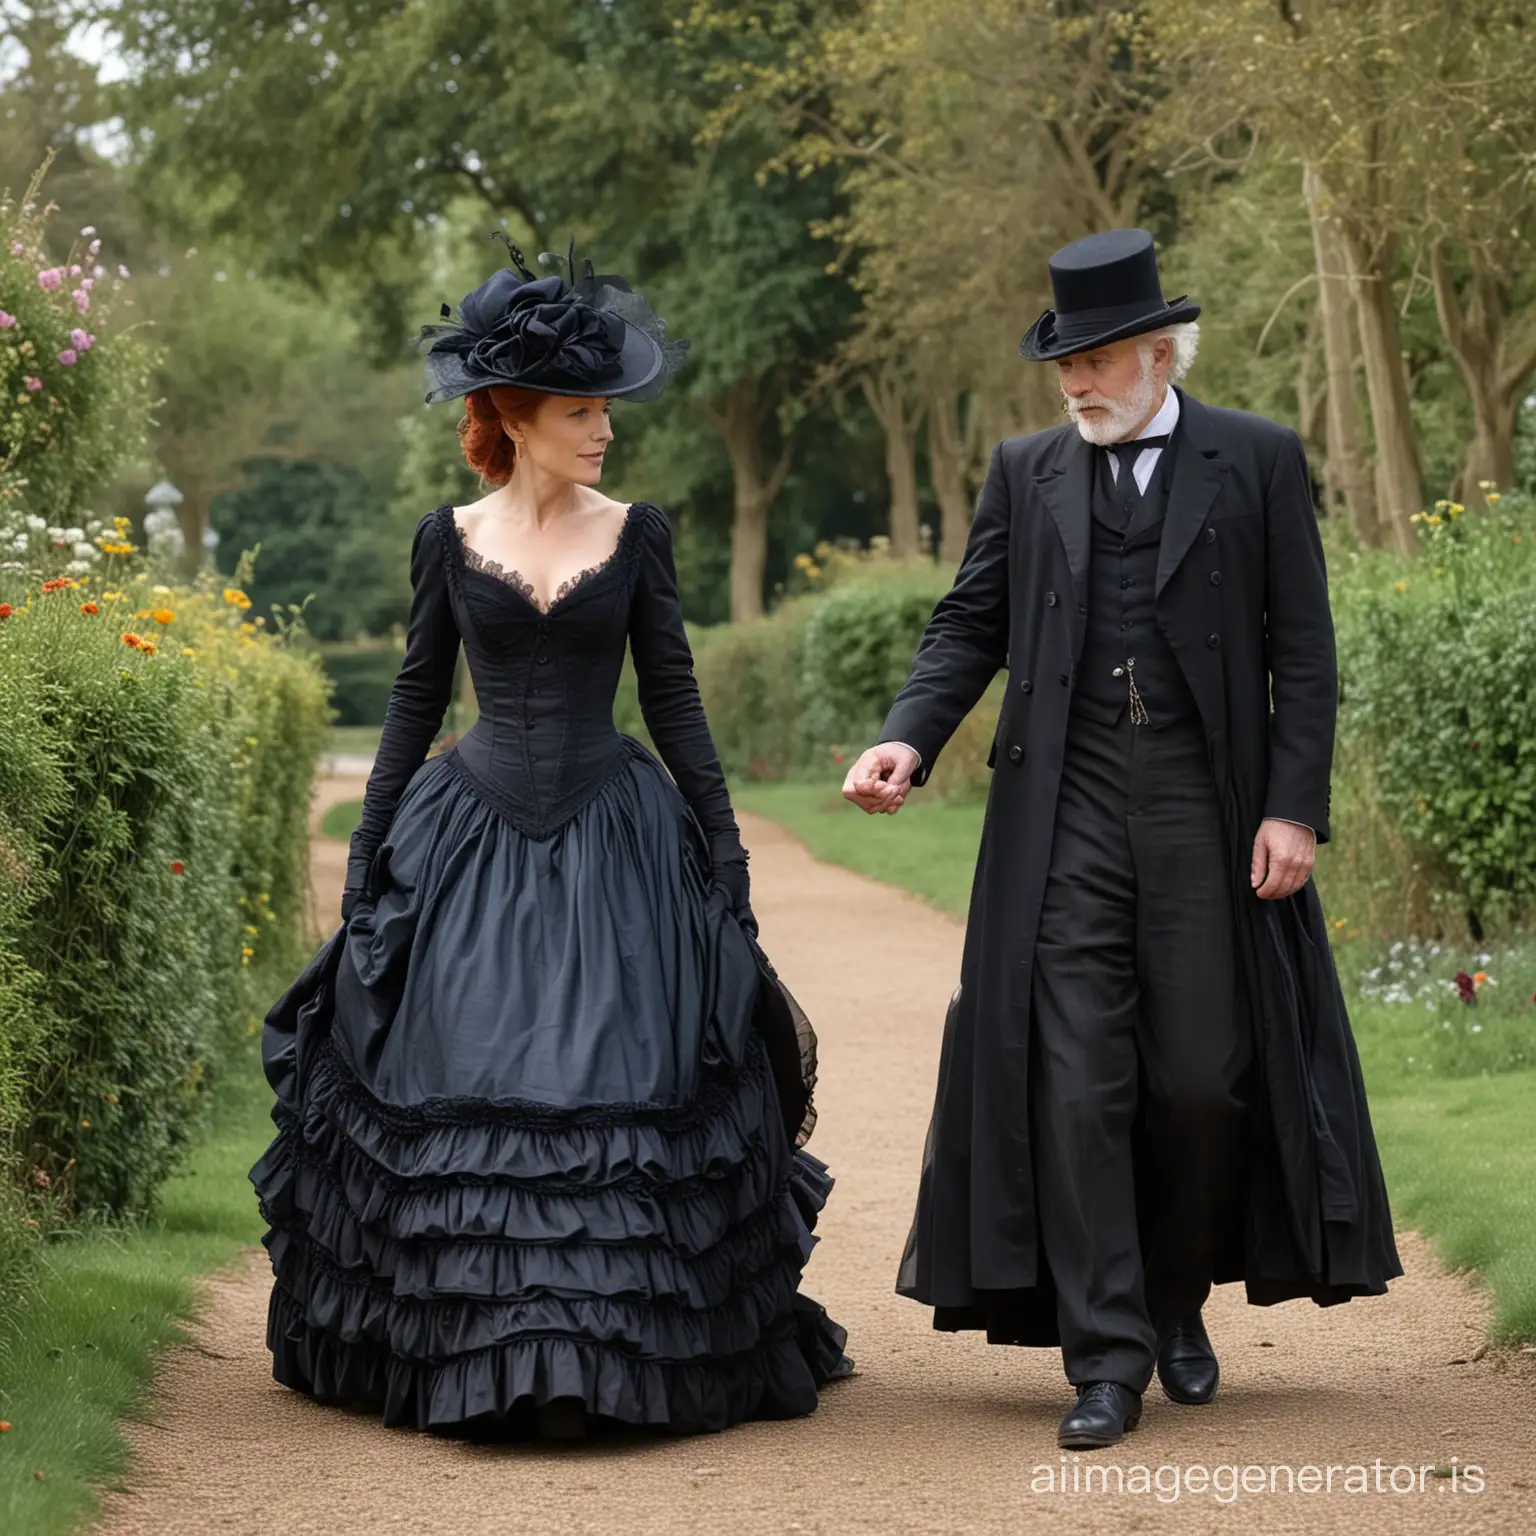 red hair Gillian Anderson wearing a dark navy floor-length loose billowing 1860 victorian crinoline poofy dress with a frilly bonnet walking with an old man dressed into a black victorian suit who seems to be her newlywed husband